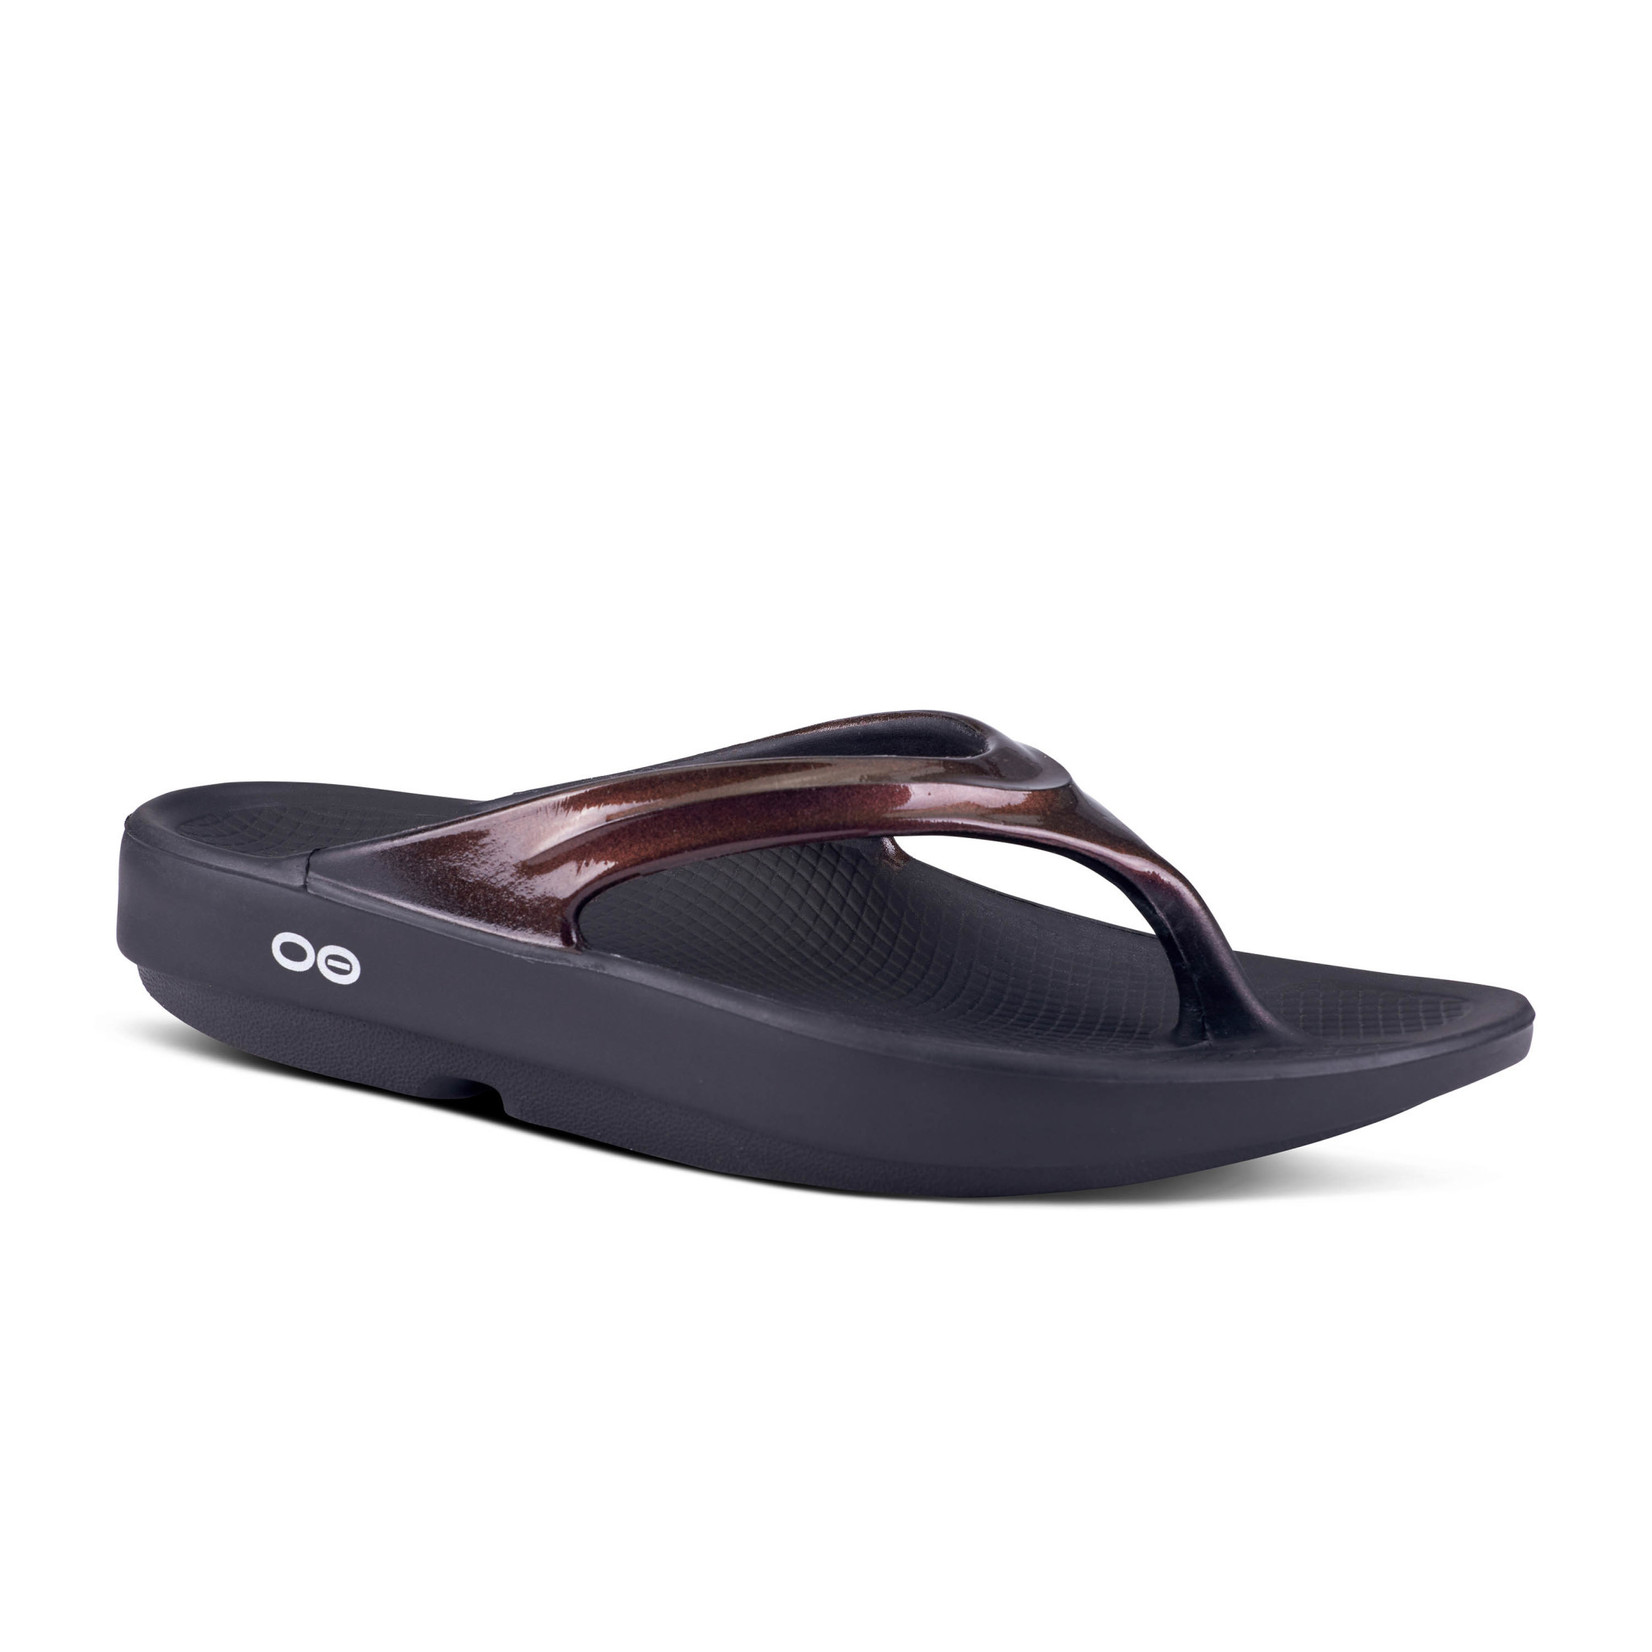 OOFOS OOFOS- OOLALA (THONG) LUXE- BLACK/CABERNET